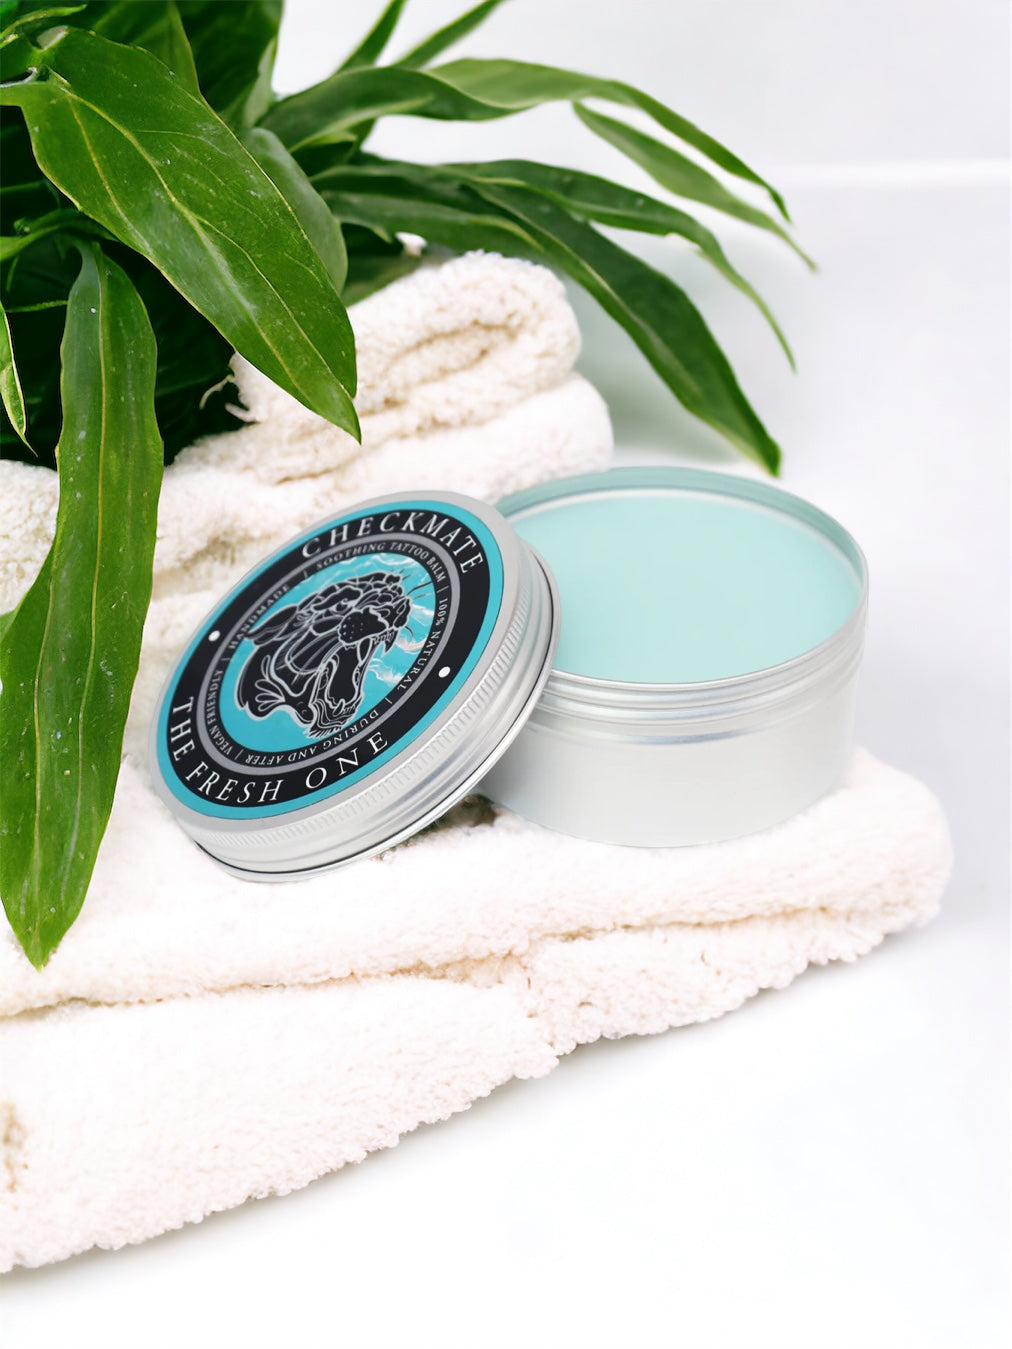 “The Fresh One” Aftercare Tattoo Balm